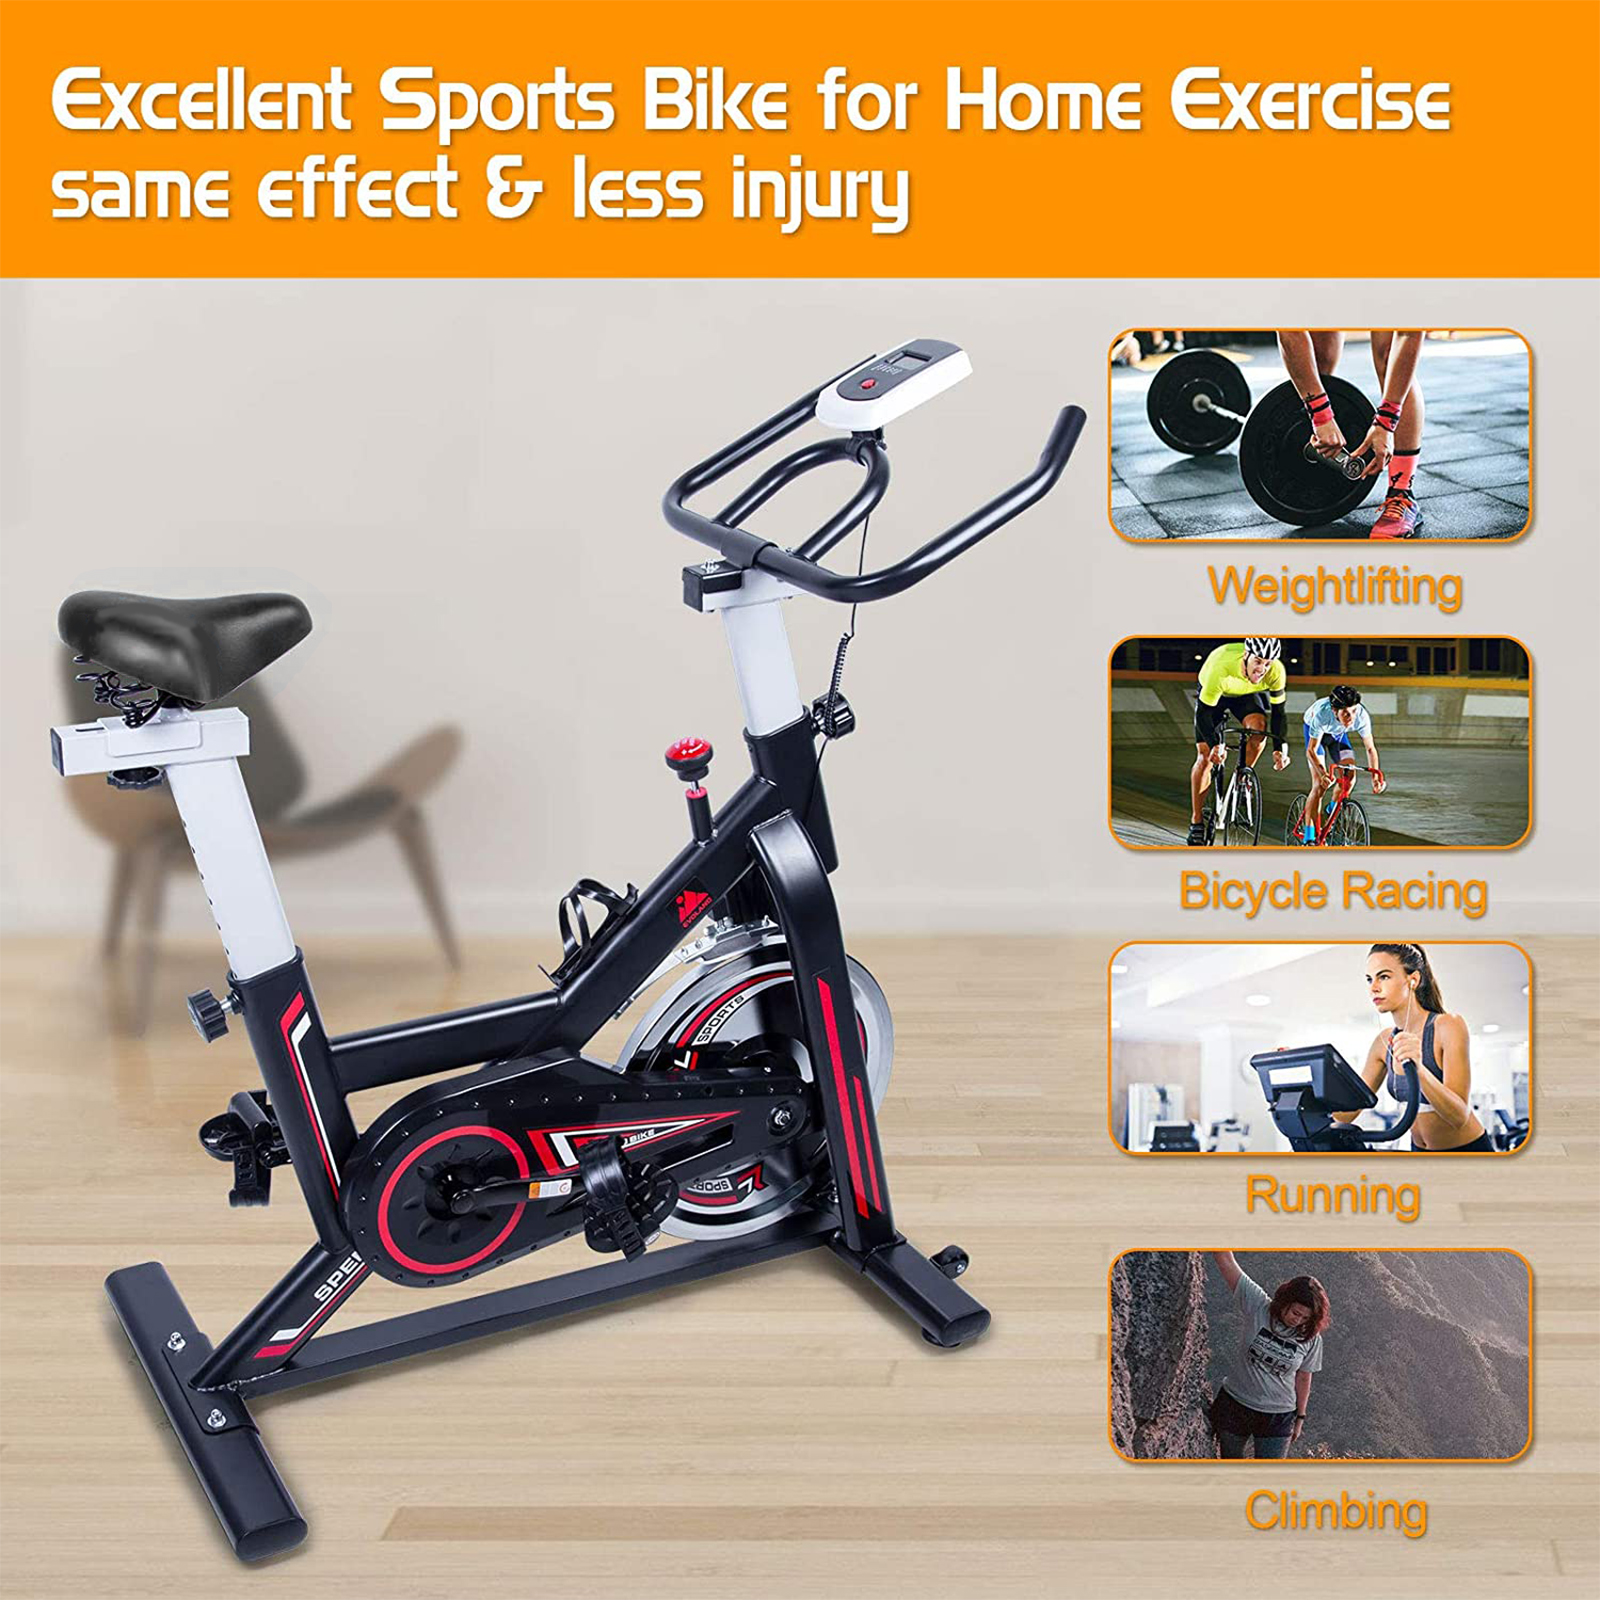 SKONYON Exercise Bike Stationary Indoor Cycling Bike Heavy Duty Flywheel Bicycle for Home Cardio Workout - image 3 of 9